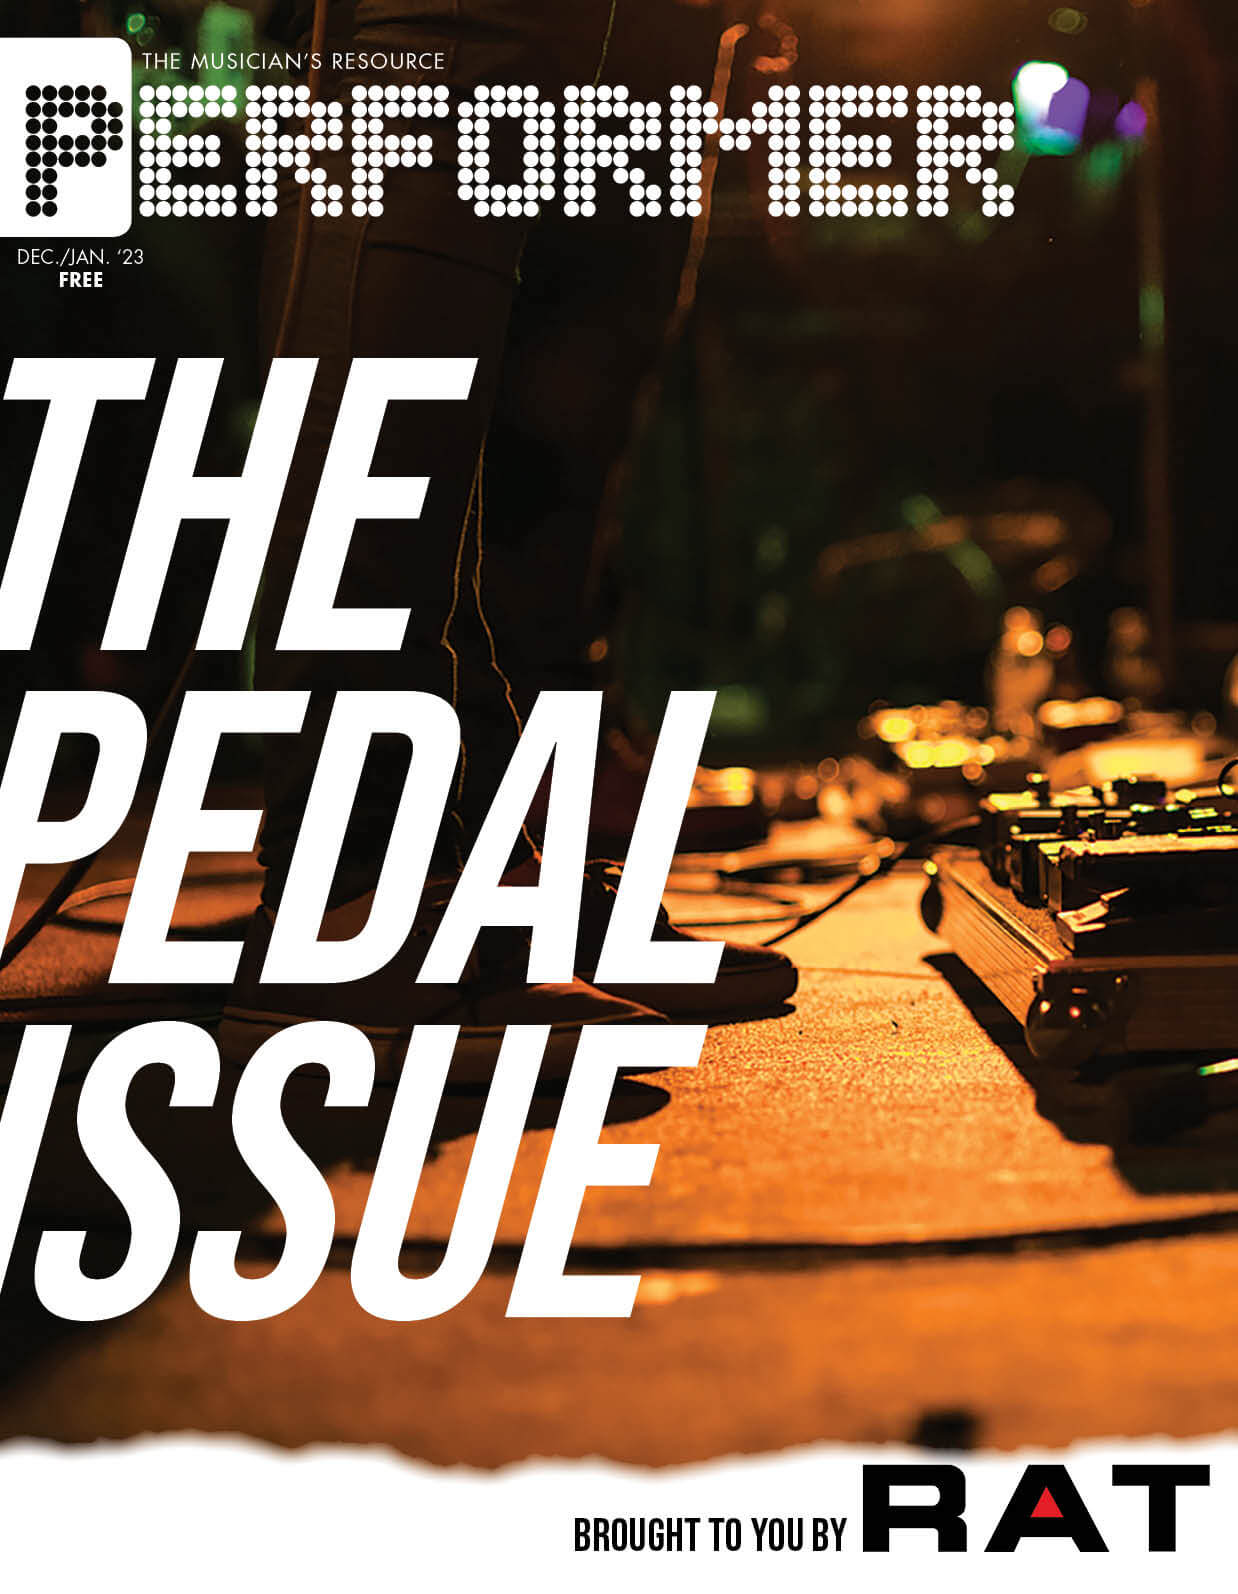 The special PEDAL ISSUE is out now!